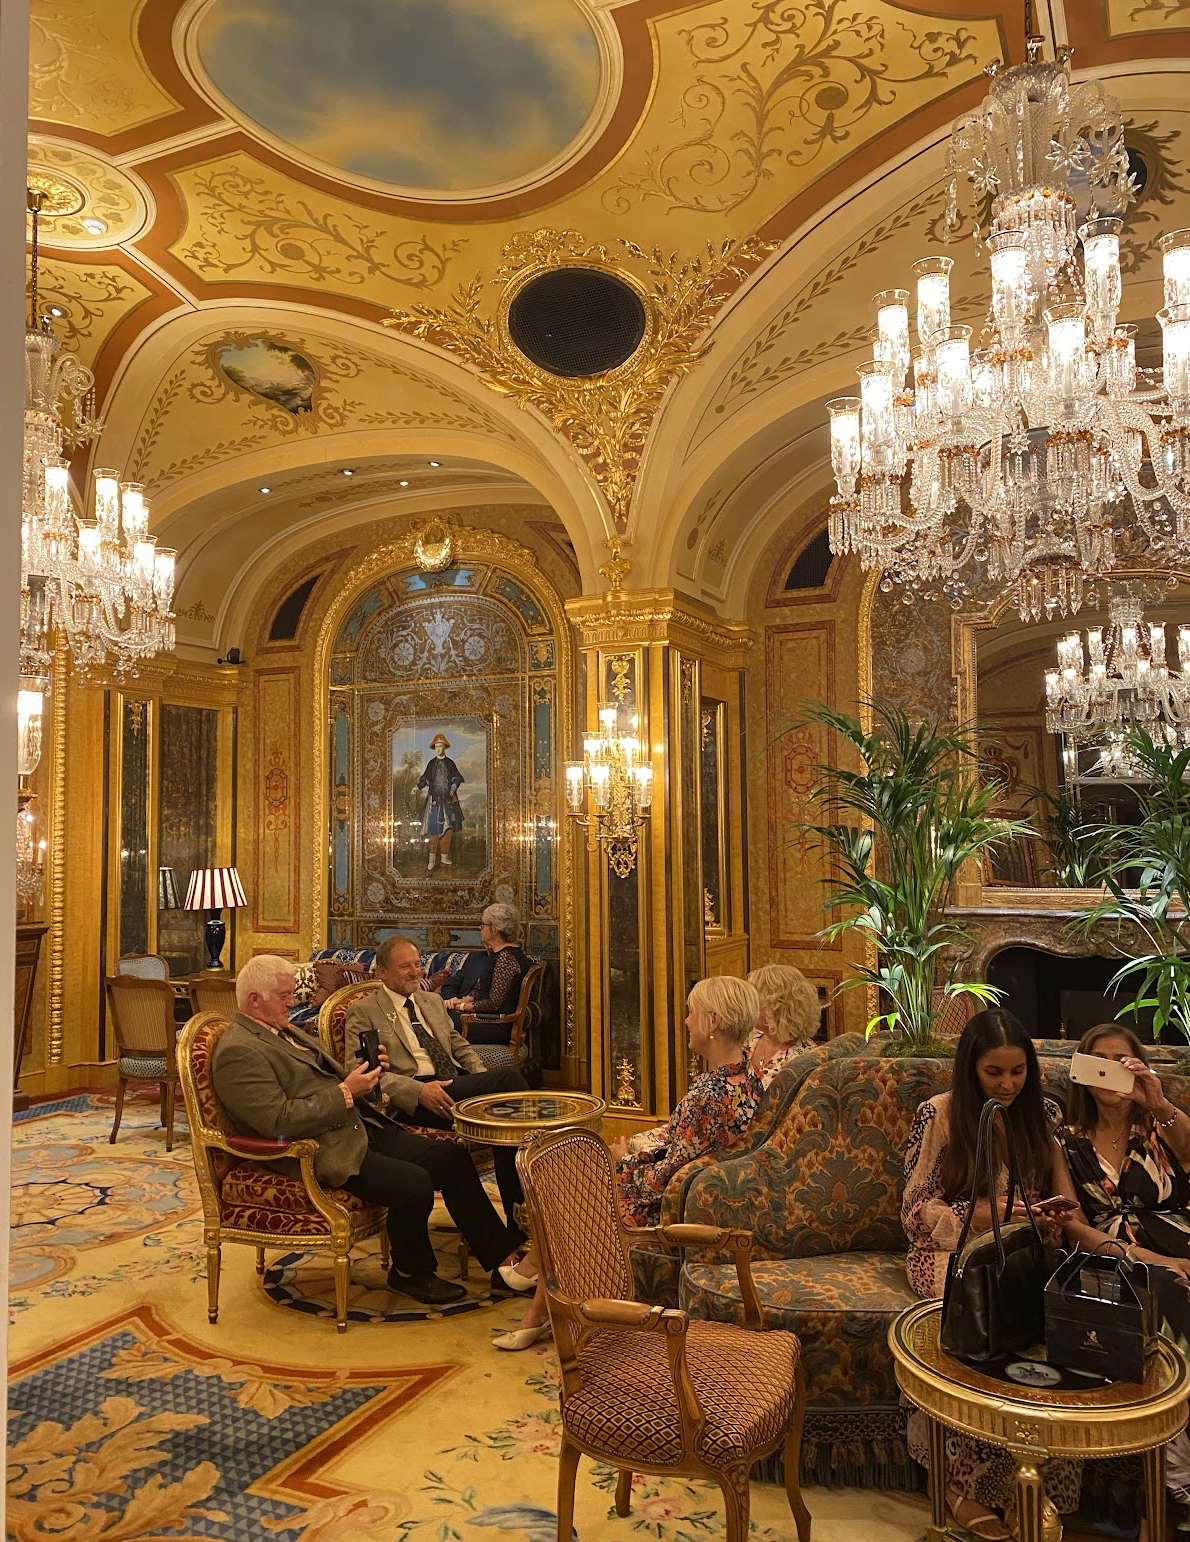 Afternoon tea at the Ritz London: a guide to the experience